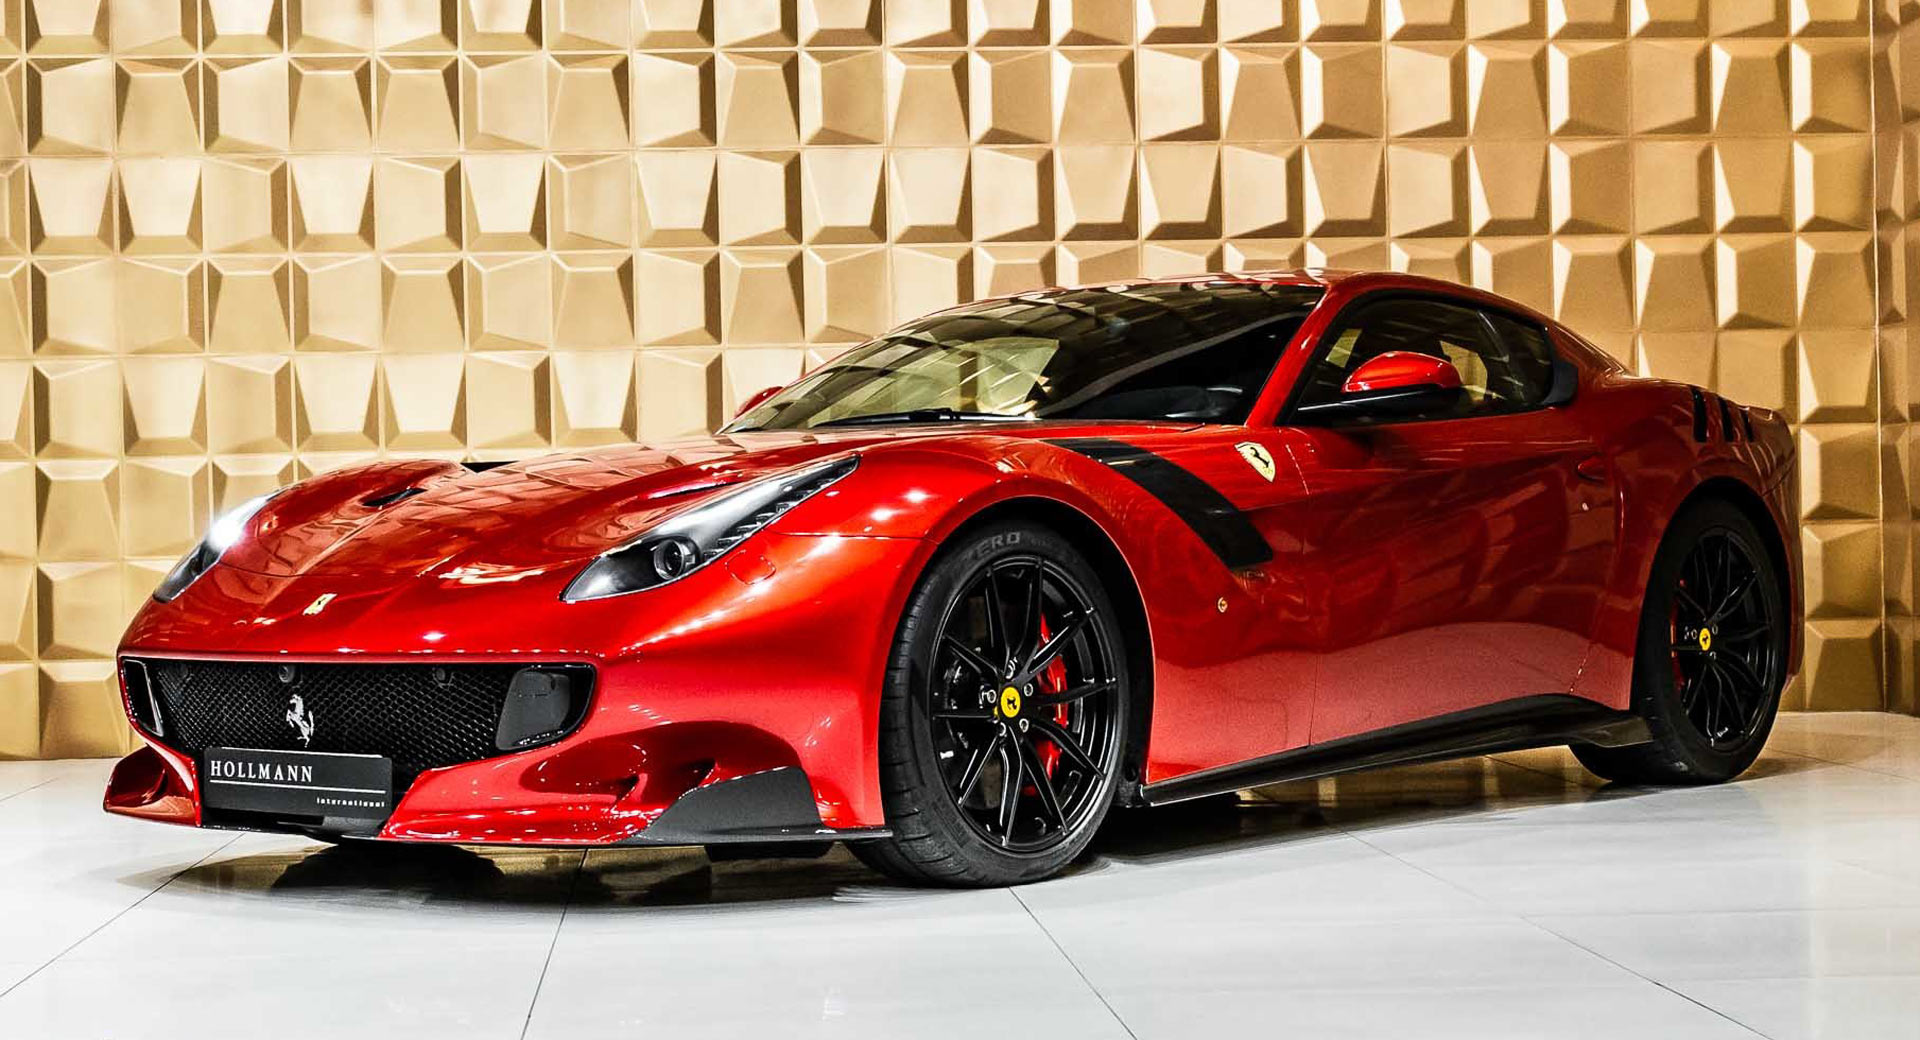 spørge Notesbog Melting This Ferrari F12tdf Is $900,000 Worth Of Italian Sex Appeal | Carscoops